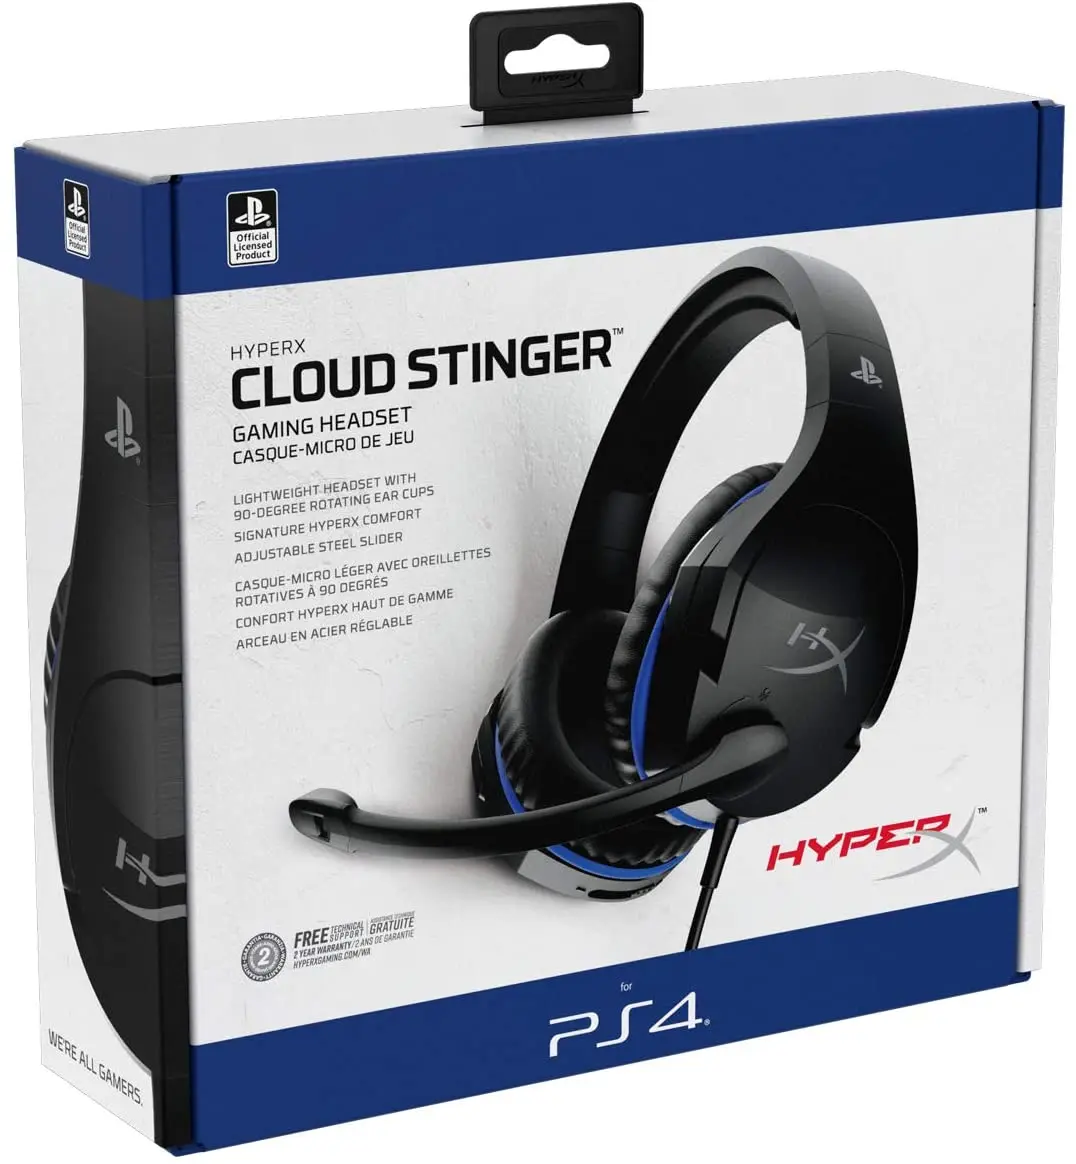 Hyper X Cloud Stinger Gaming Headset Official Licensed For Ps4 And Ps5 Swivel-to-mute Mic Gaming Headset - Buy Hyper X Cloud Stinger,Hyper X Headphone,Pink Computer Headset Product on Alibaba.com